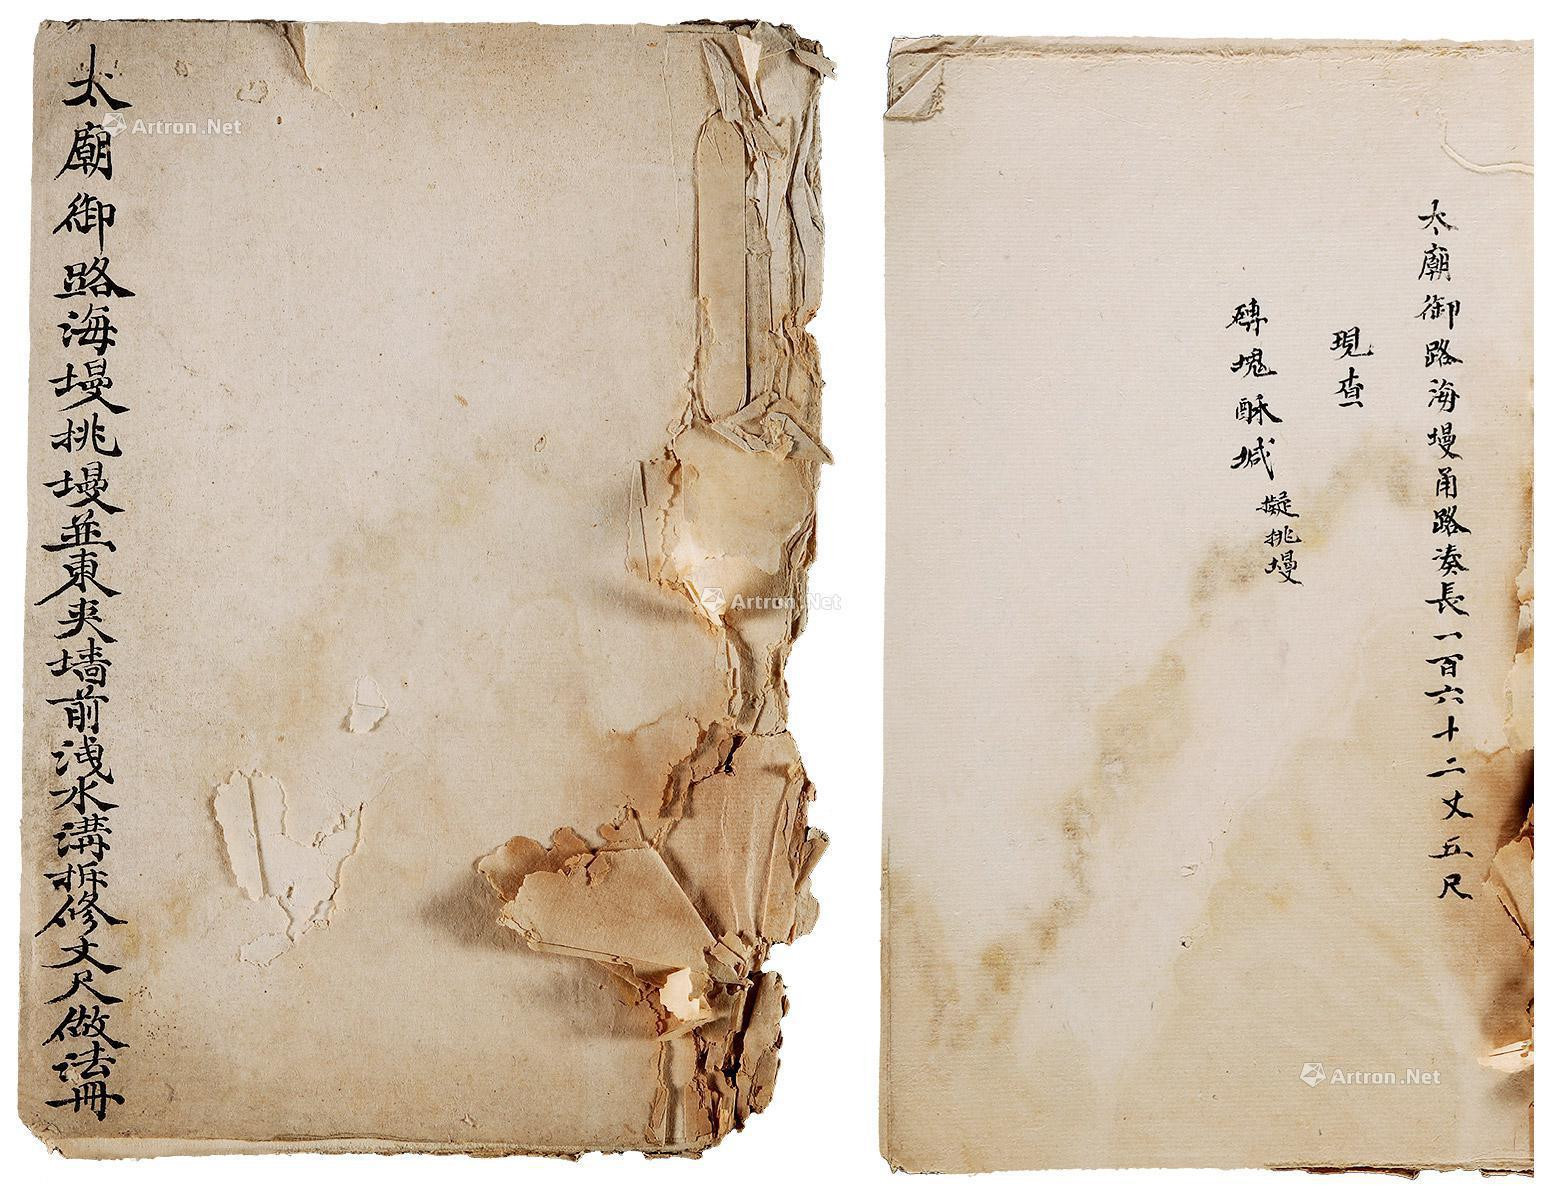 One volume of the“Book of Practice on Dismantling and Repairing Zhang Rulers in Taimiao Imperial Road with Watersheds in Front of the East Wall”written by The Office of Internal Affairs 